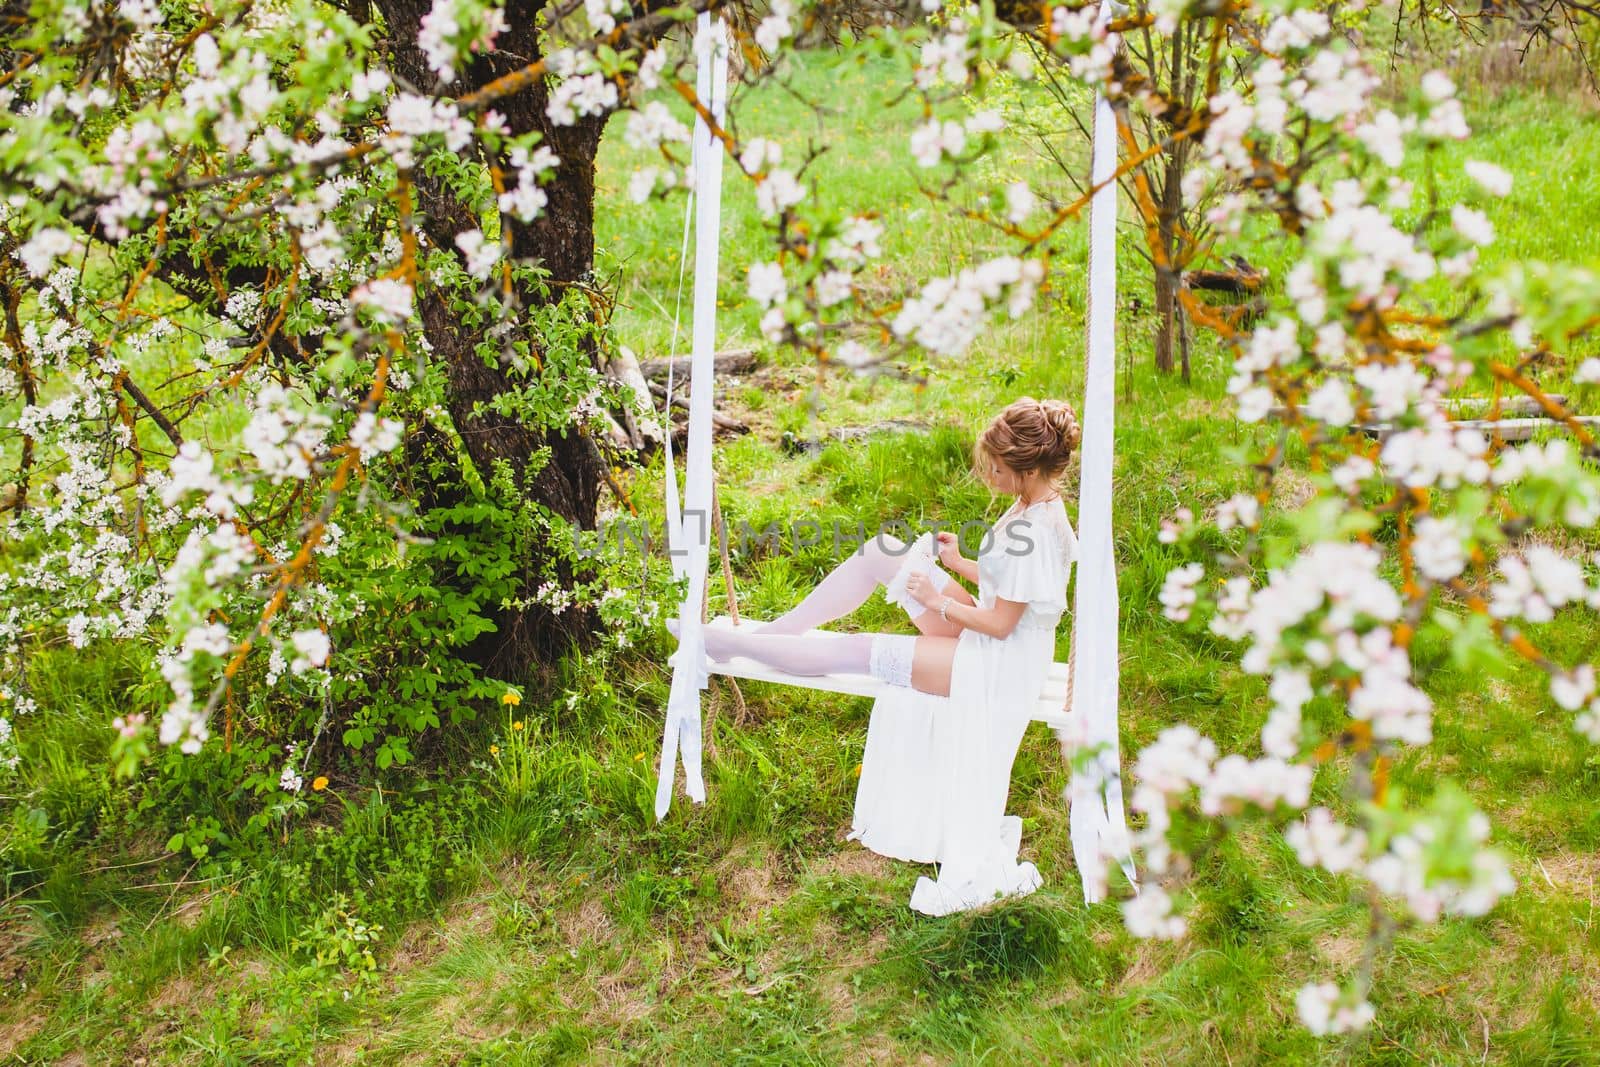 Young bride with blond hair in white negligee and stockings sitting on a rope swing putting on a garter at the background of spring blossom orchard